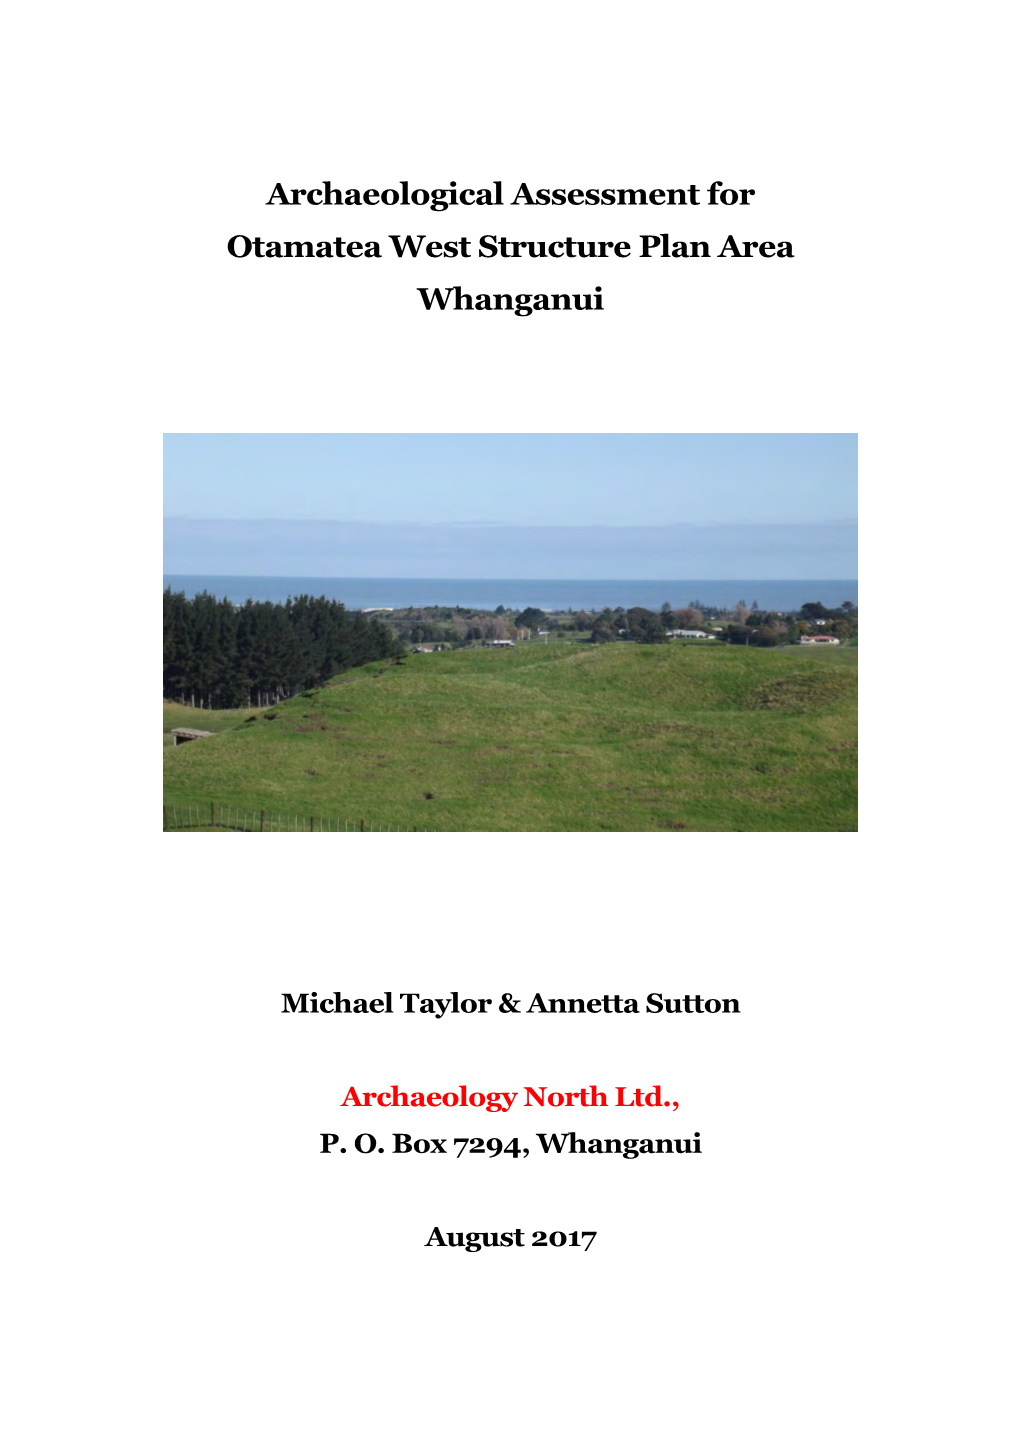 Archaeological Assessment for Otamatea West Structure Plan Area Whanganui